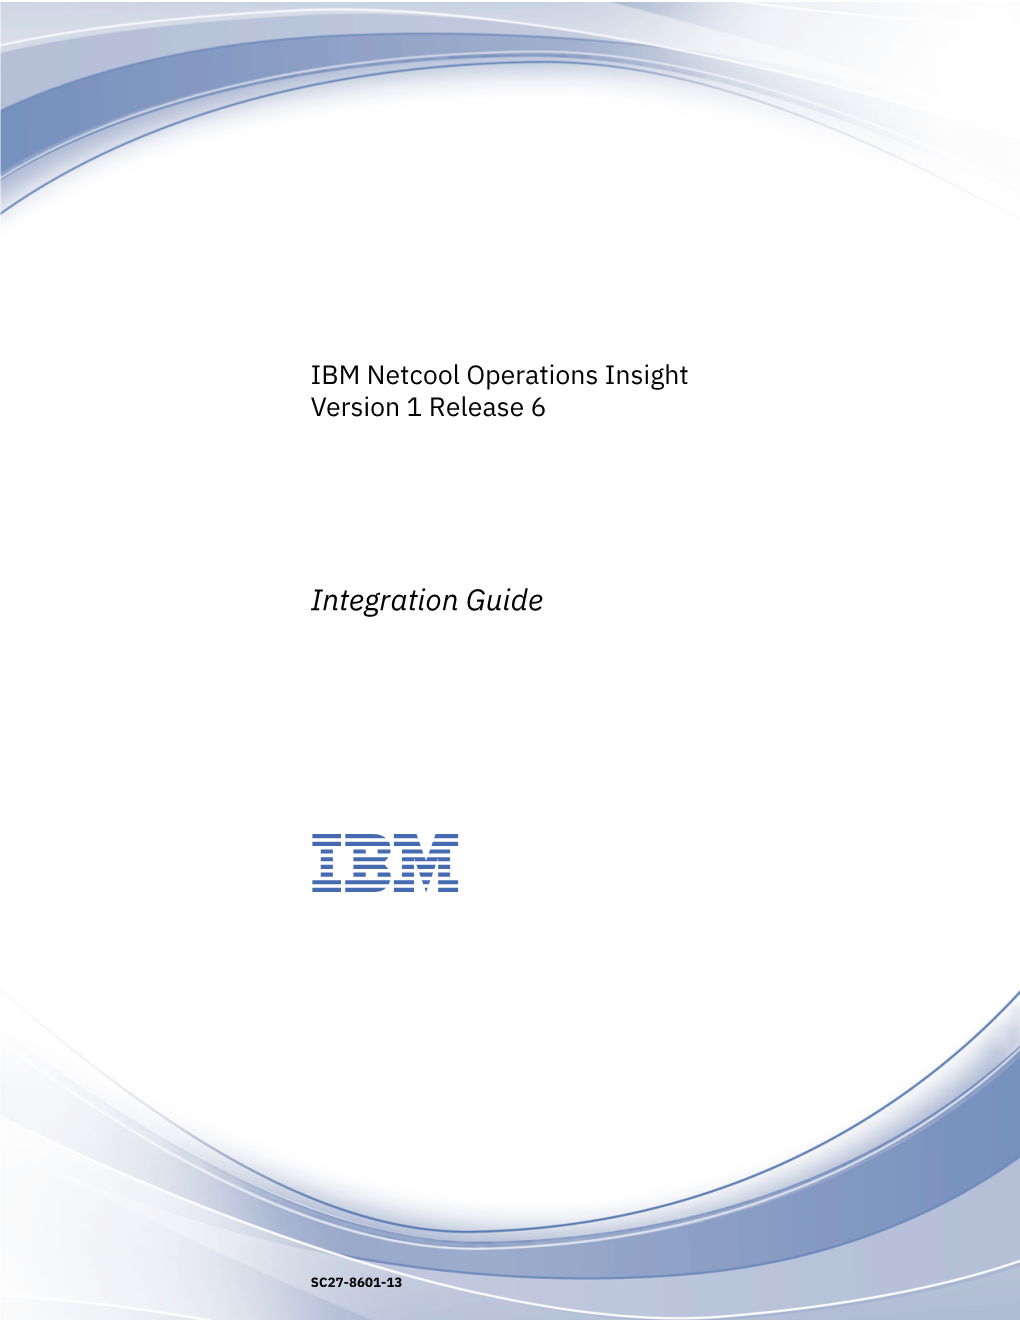 IBM Netcool Operations Insight: Integration Guide Chapter 1